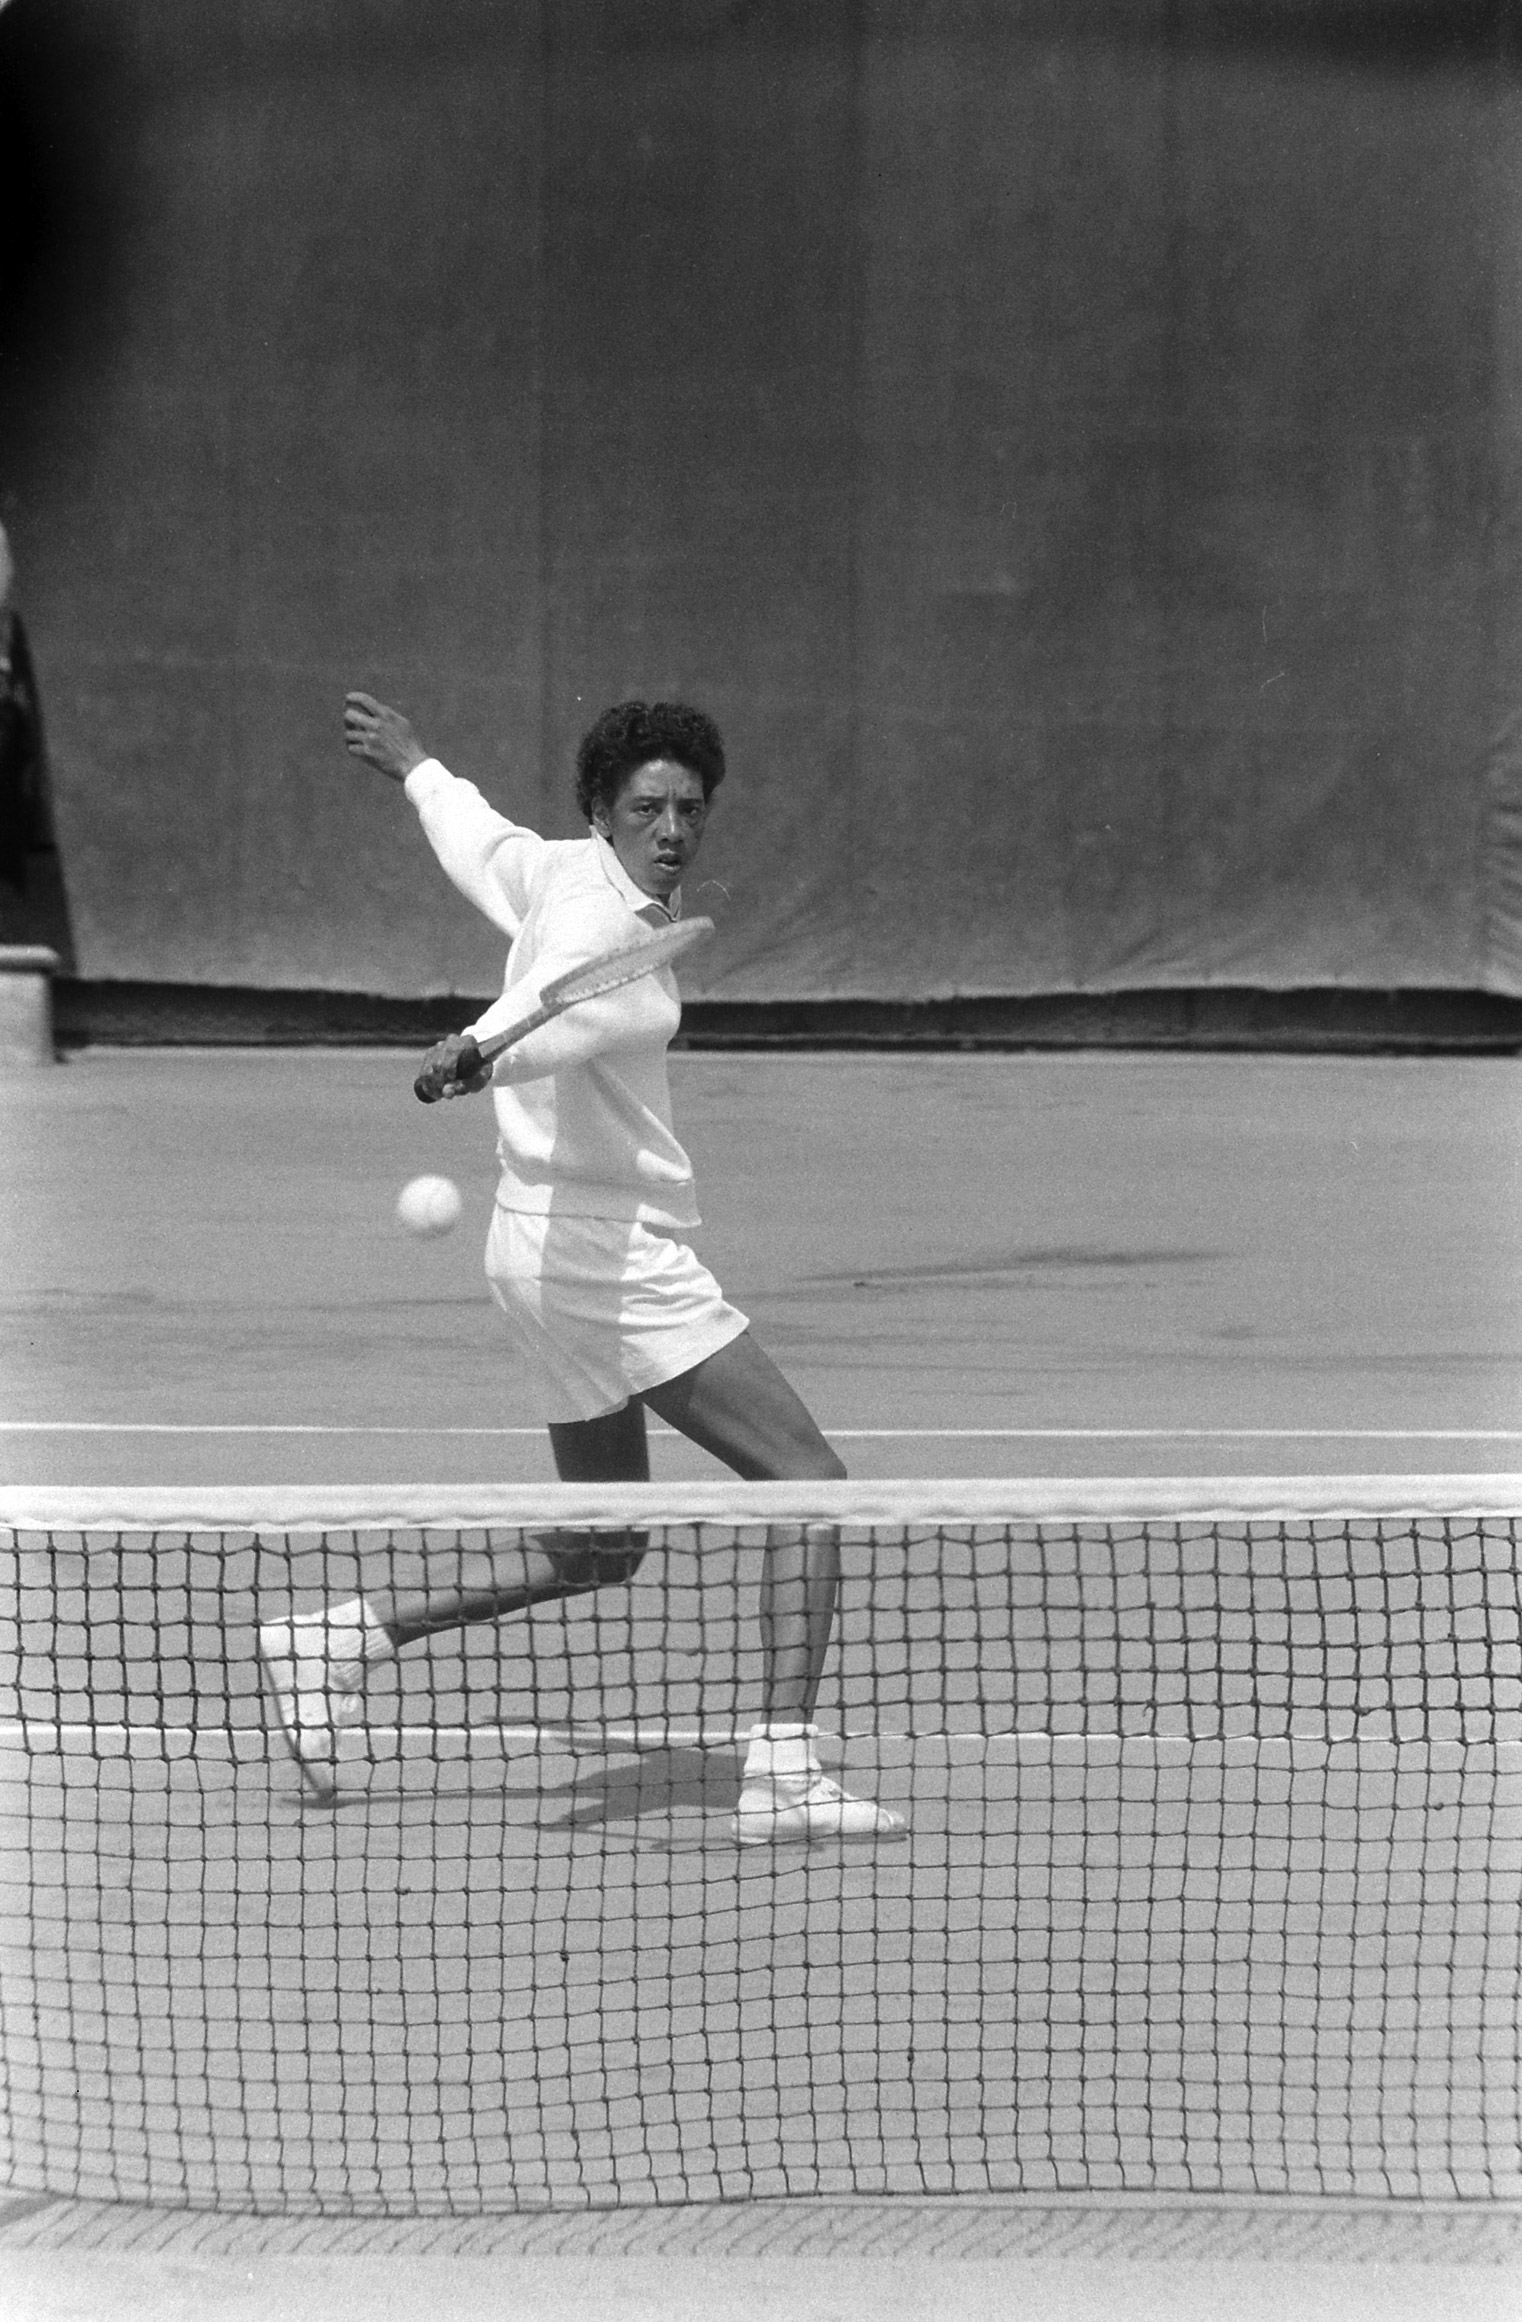 Tennis player Althea Gibson in France, 1956.